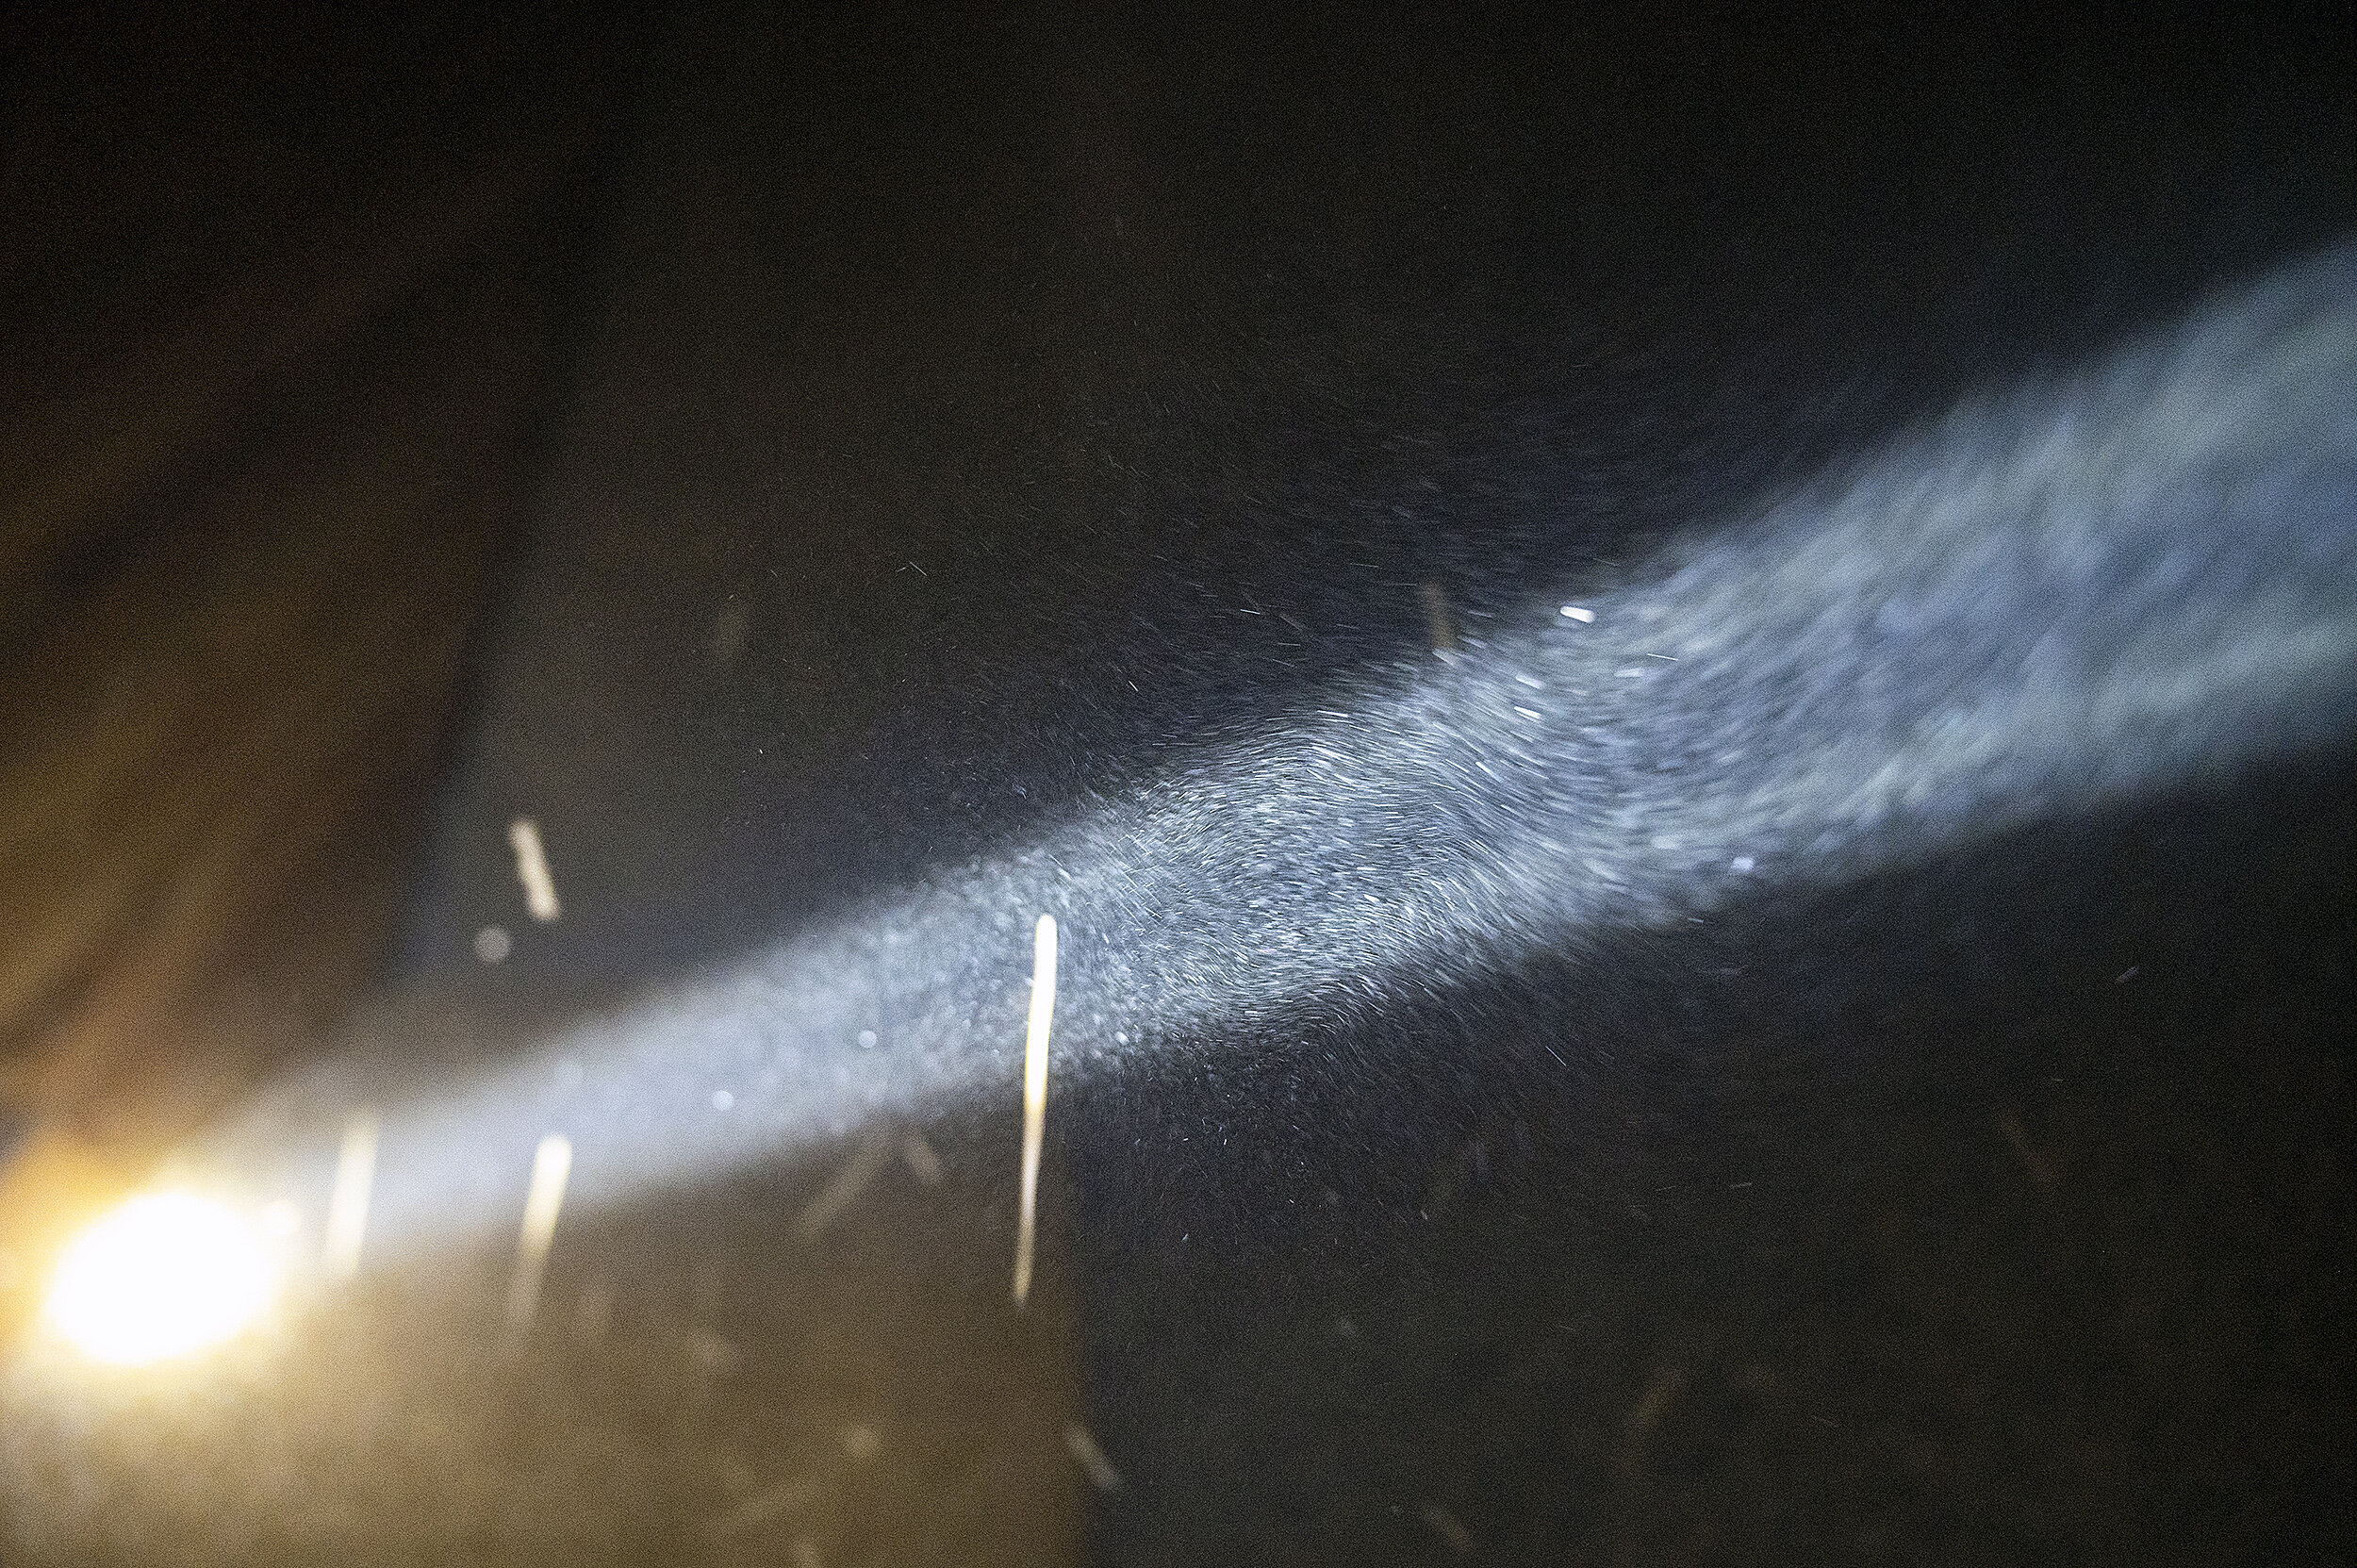  Particles of grain are illuminated by Tony Egland’s flashlight as he shows how one of the storage areas is almost empty after a bumper crop this summer. 